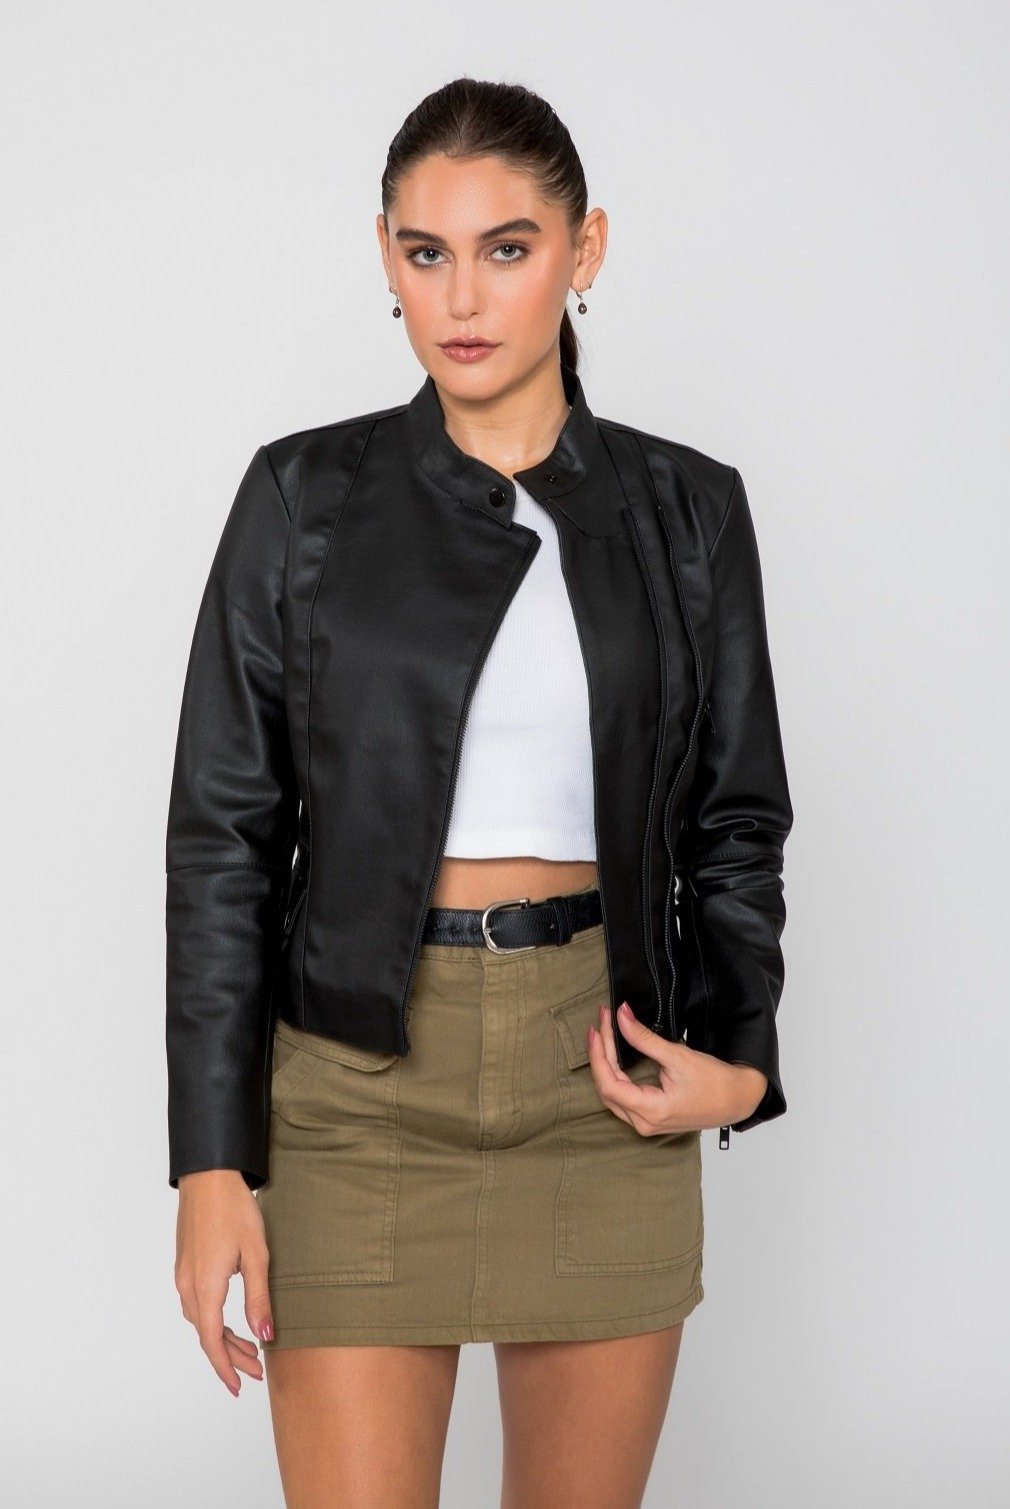 Picture of a Women's Soft Faux Black Leather Jacket front view